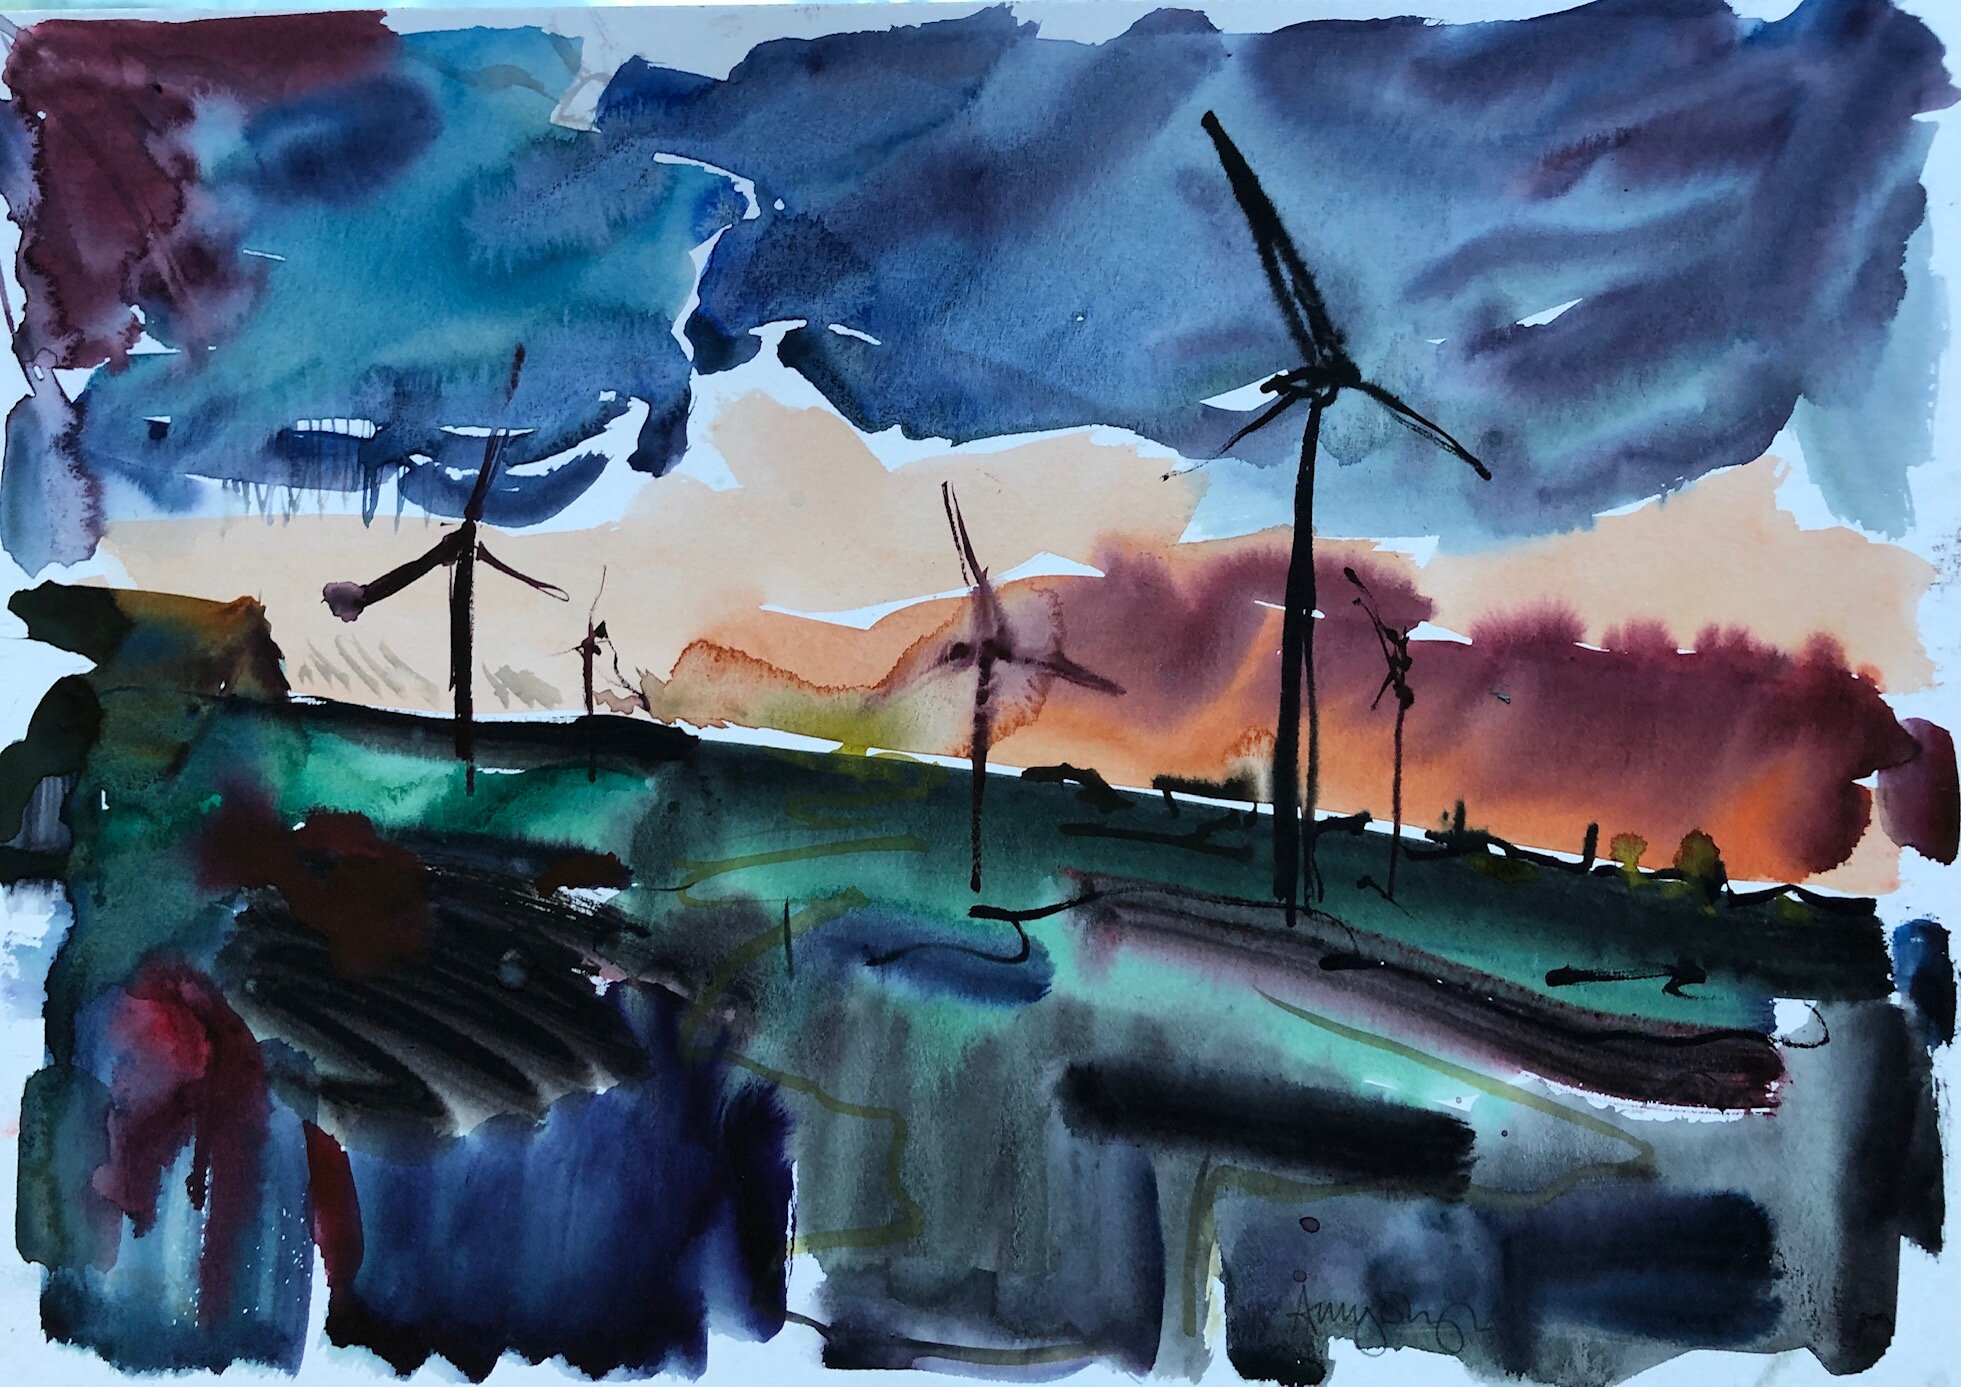 Sunset with Turbines, watercolour on board, 30x40cm £200